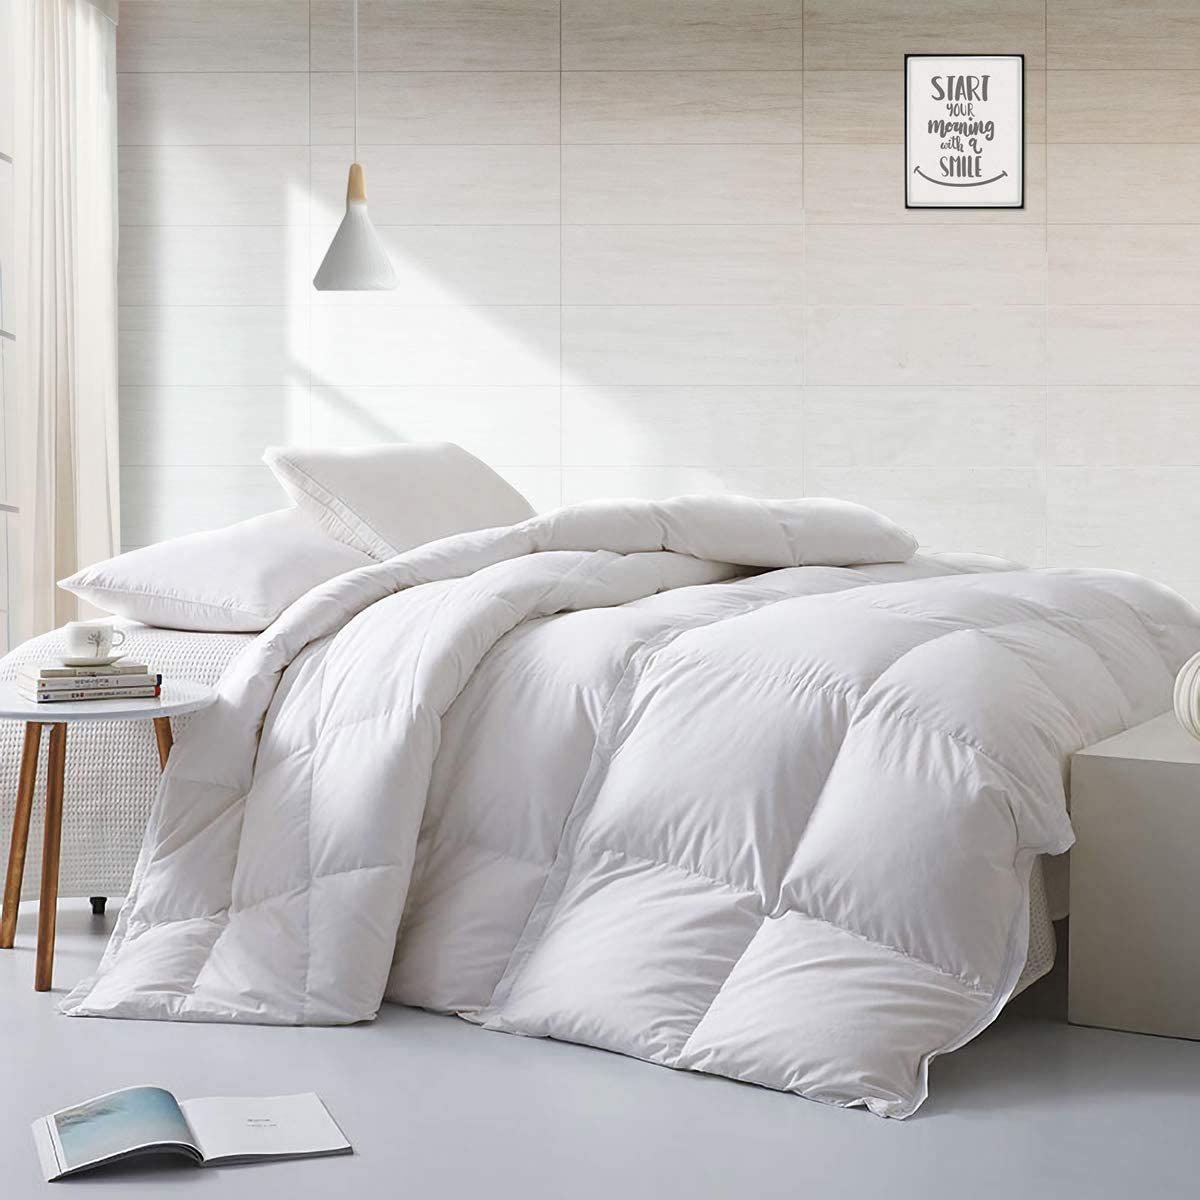 Price:$145.00  Lightweight Feathers Down Comforter Full/Queen Duvet Insert Summer Warmer Climates / Sleeper -Ultra-Soft Home Collection Comforter, 33Oz Thin Light Warmth, (90x90, Solid White) : Home & Kitchen